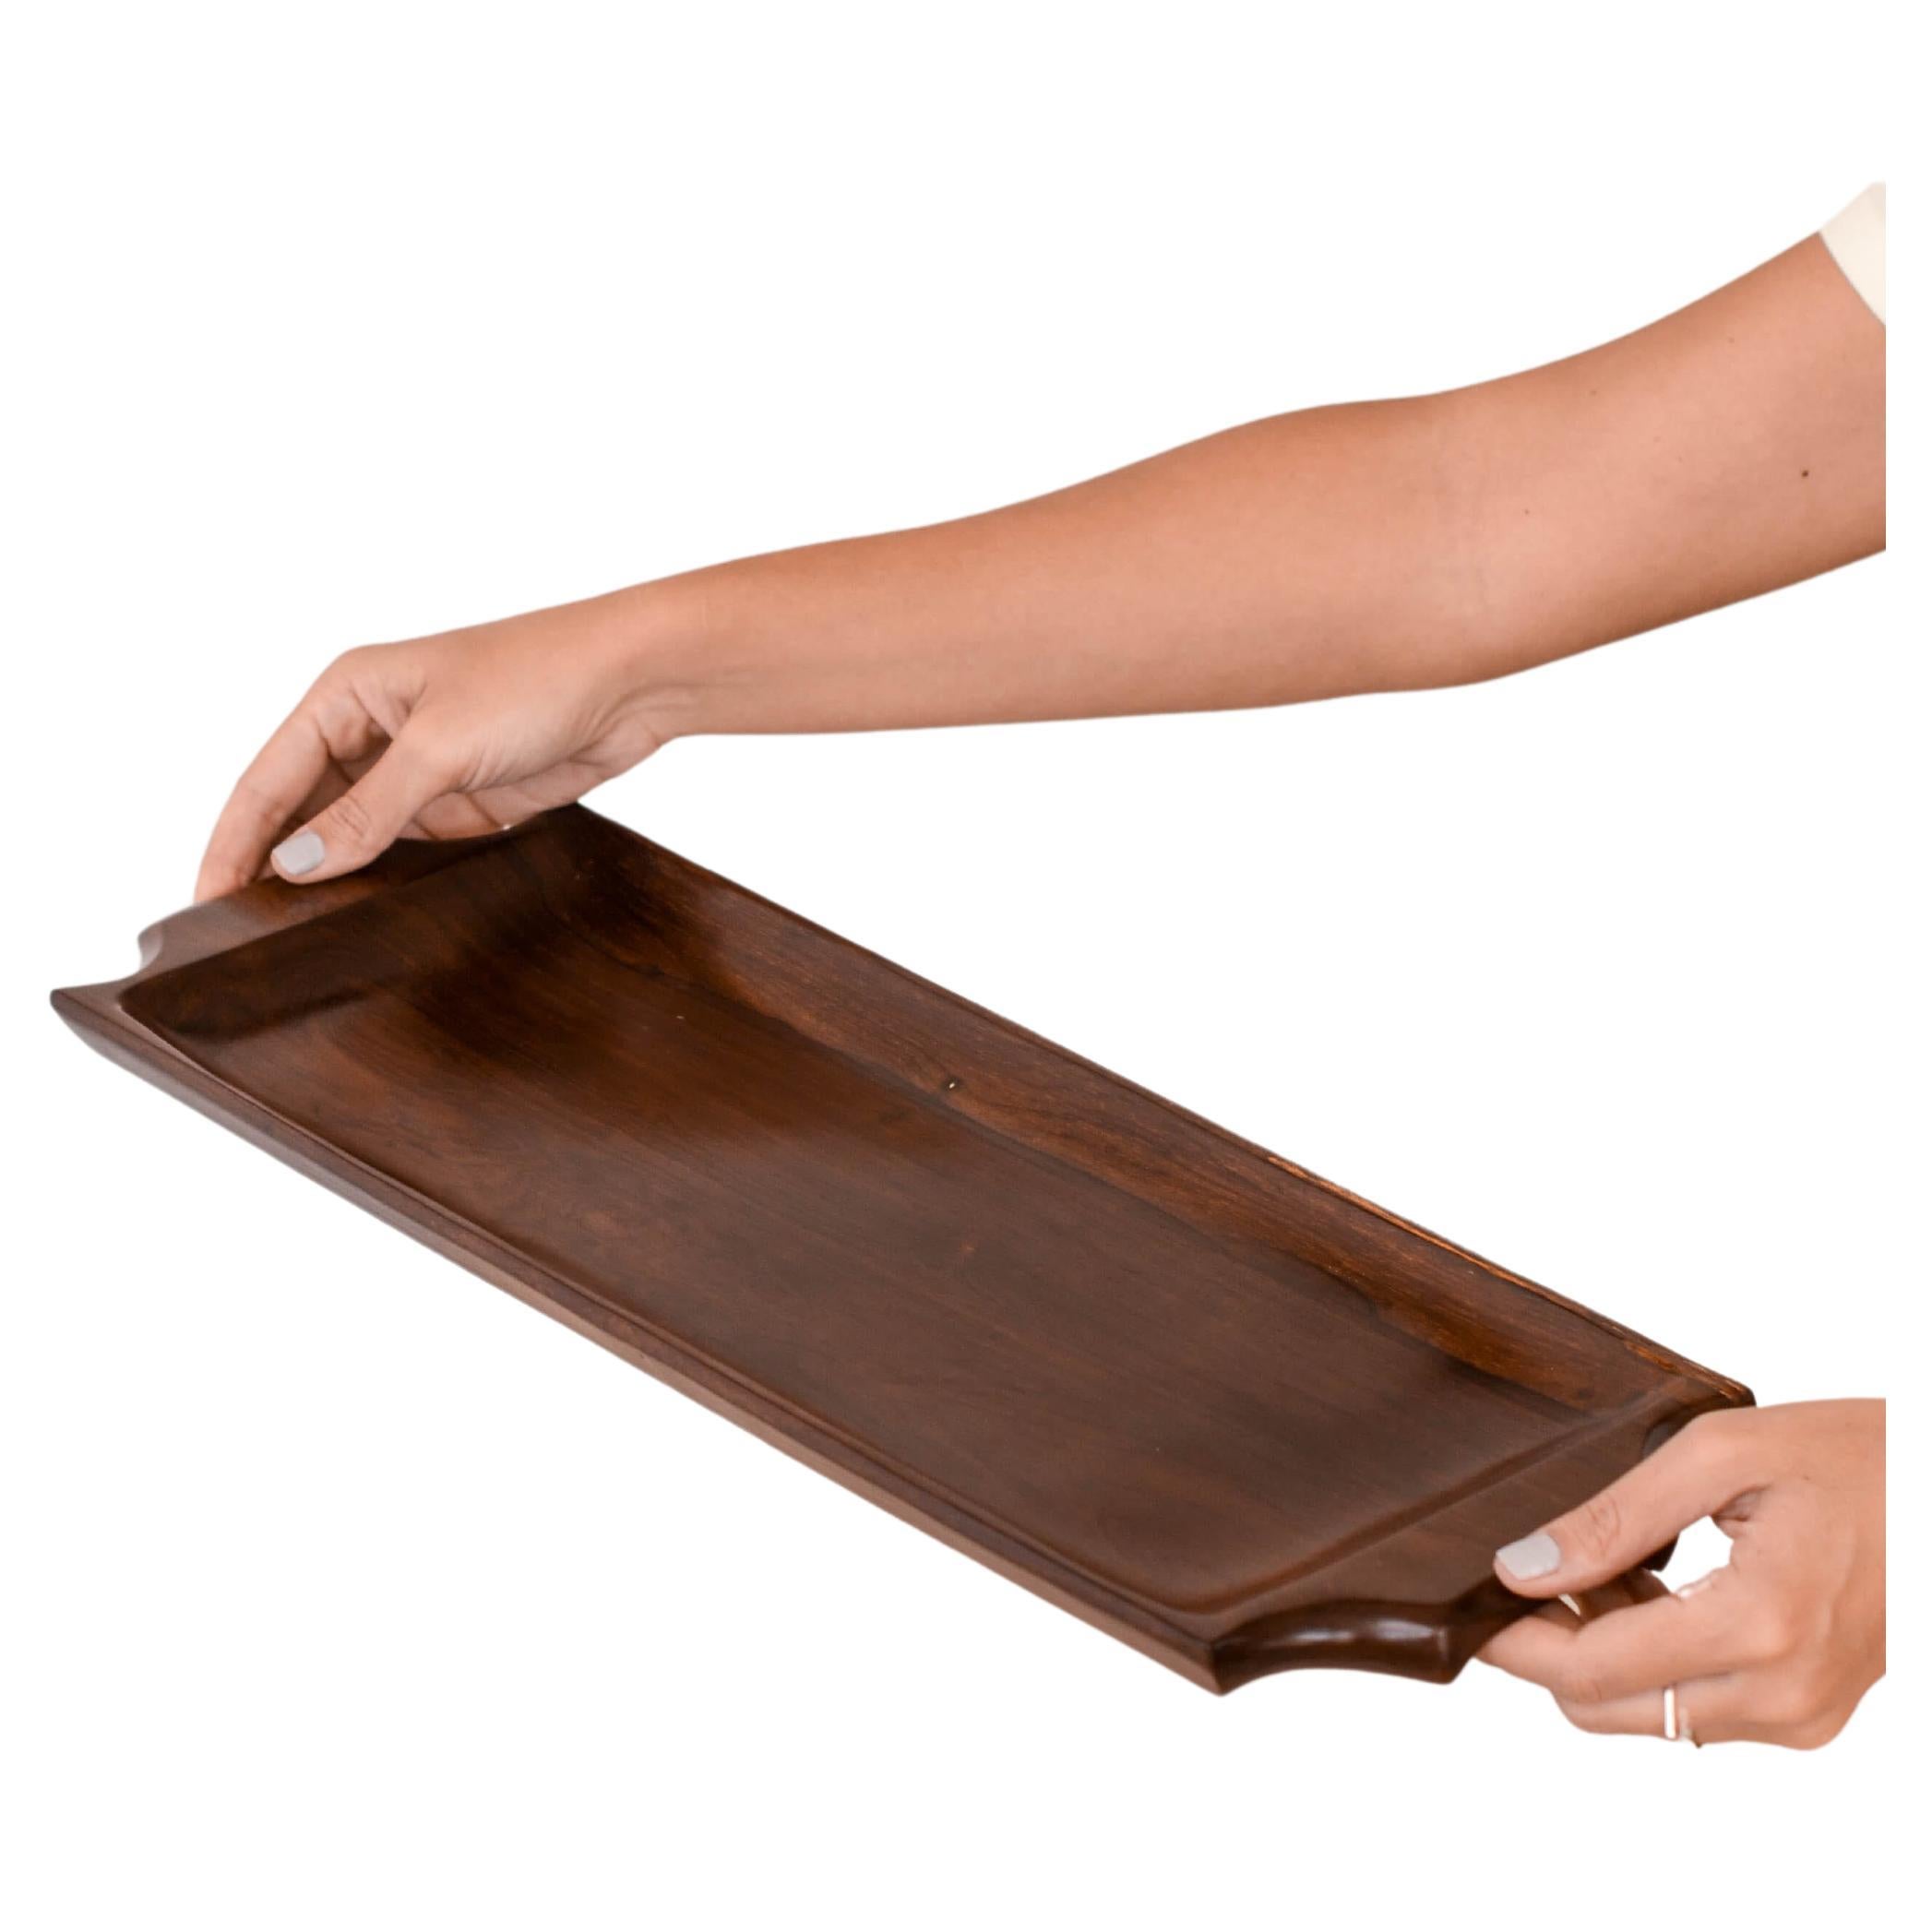 Brazilian Midcentury Serving Tray in Rosewood, c. 1970 For Sale